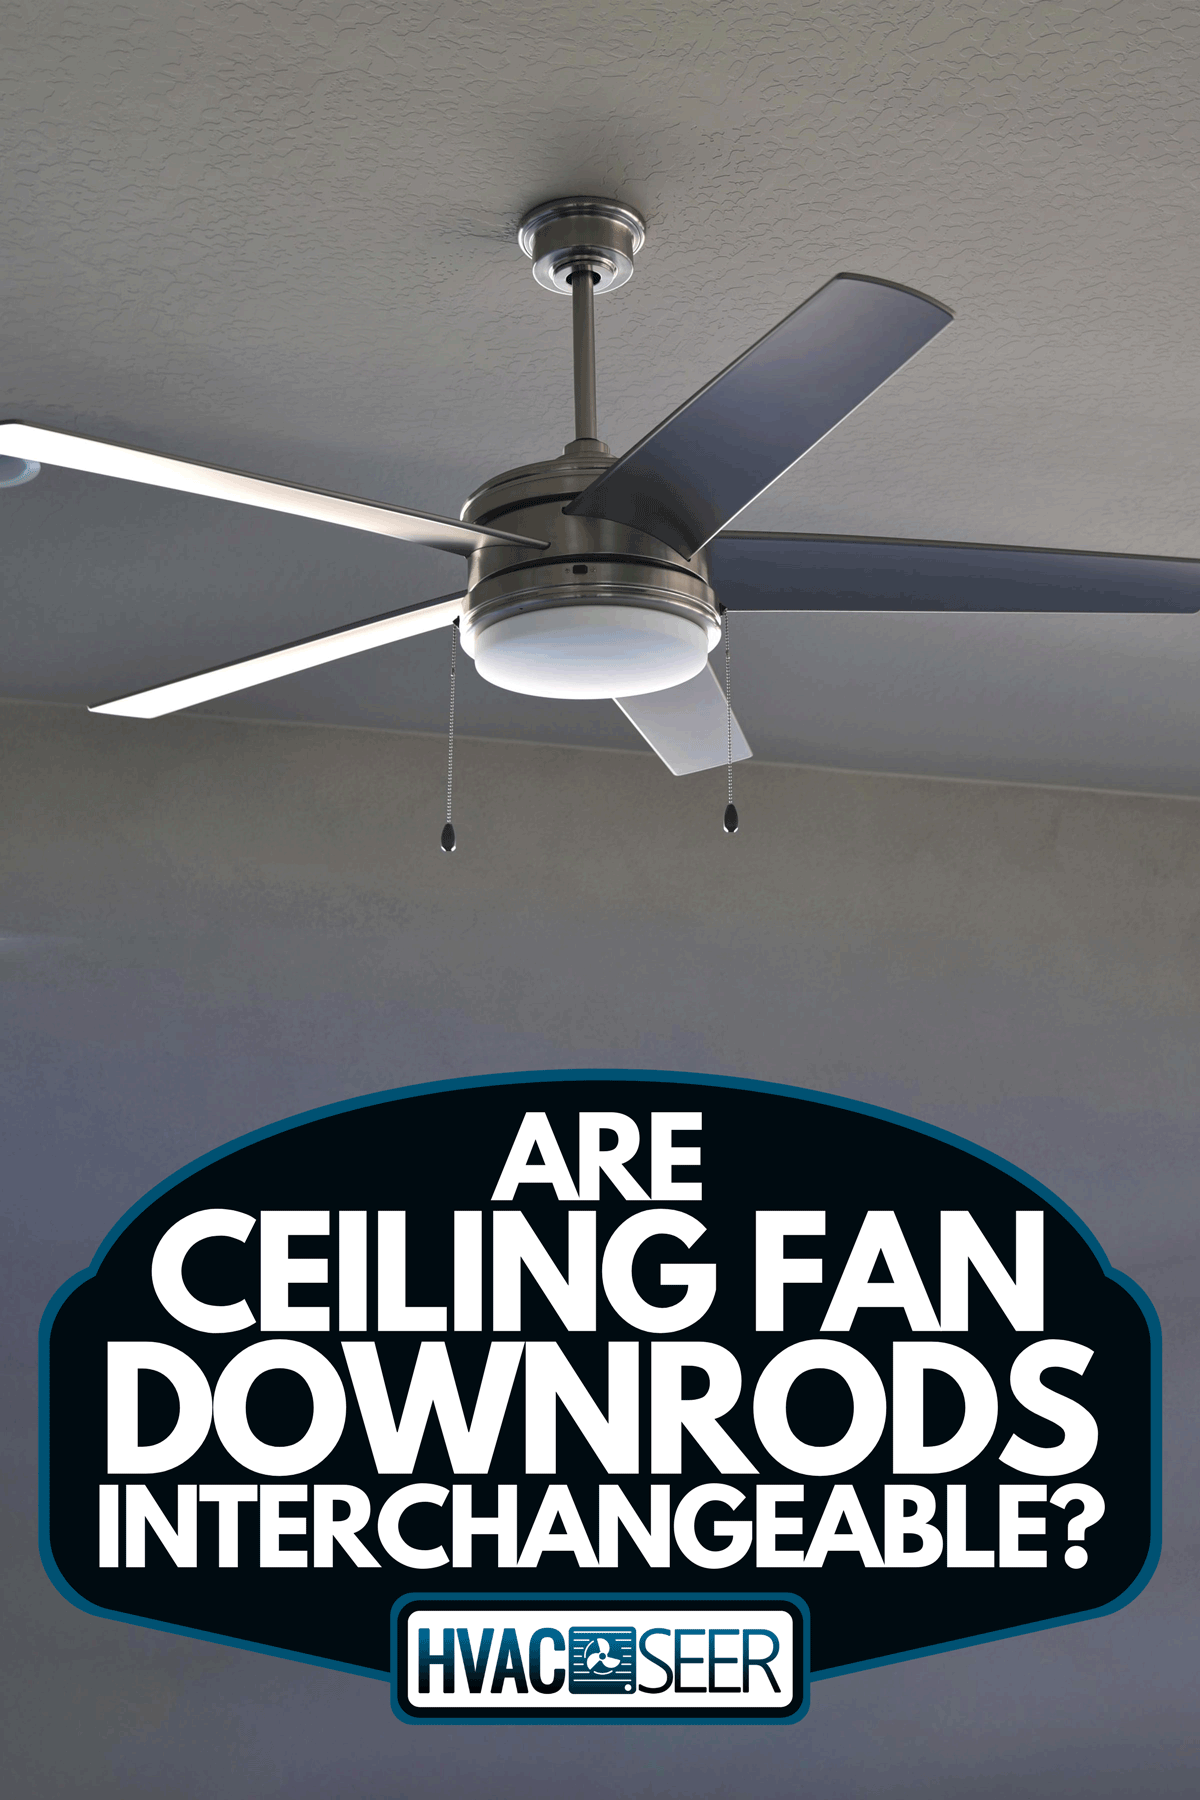 An outdoor ceiling fan with LED lighting, Are Ceiling Fan Downrods Interchangeable?